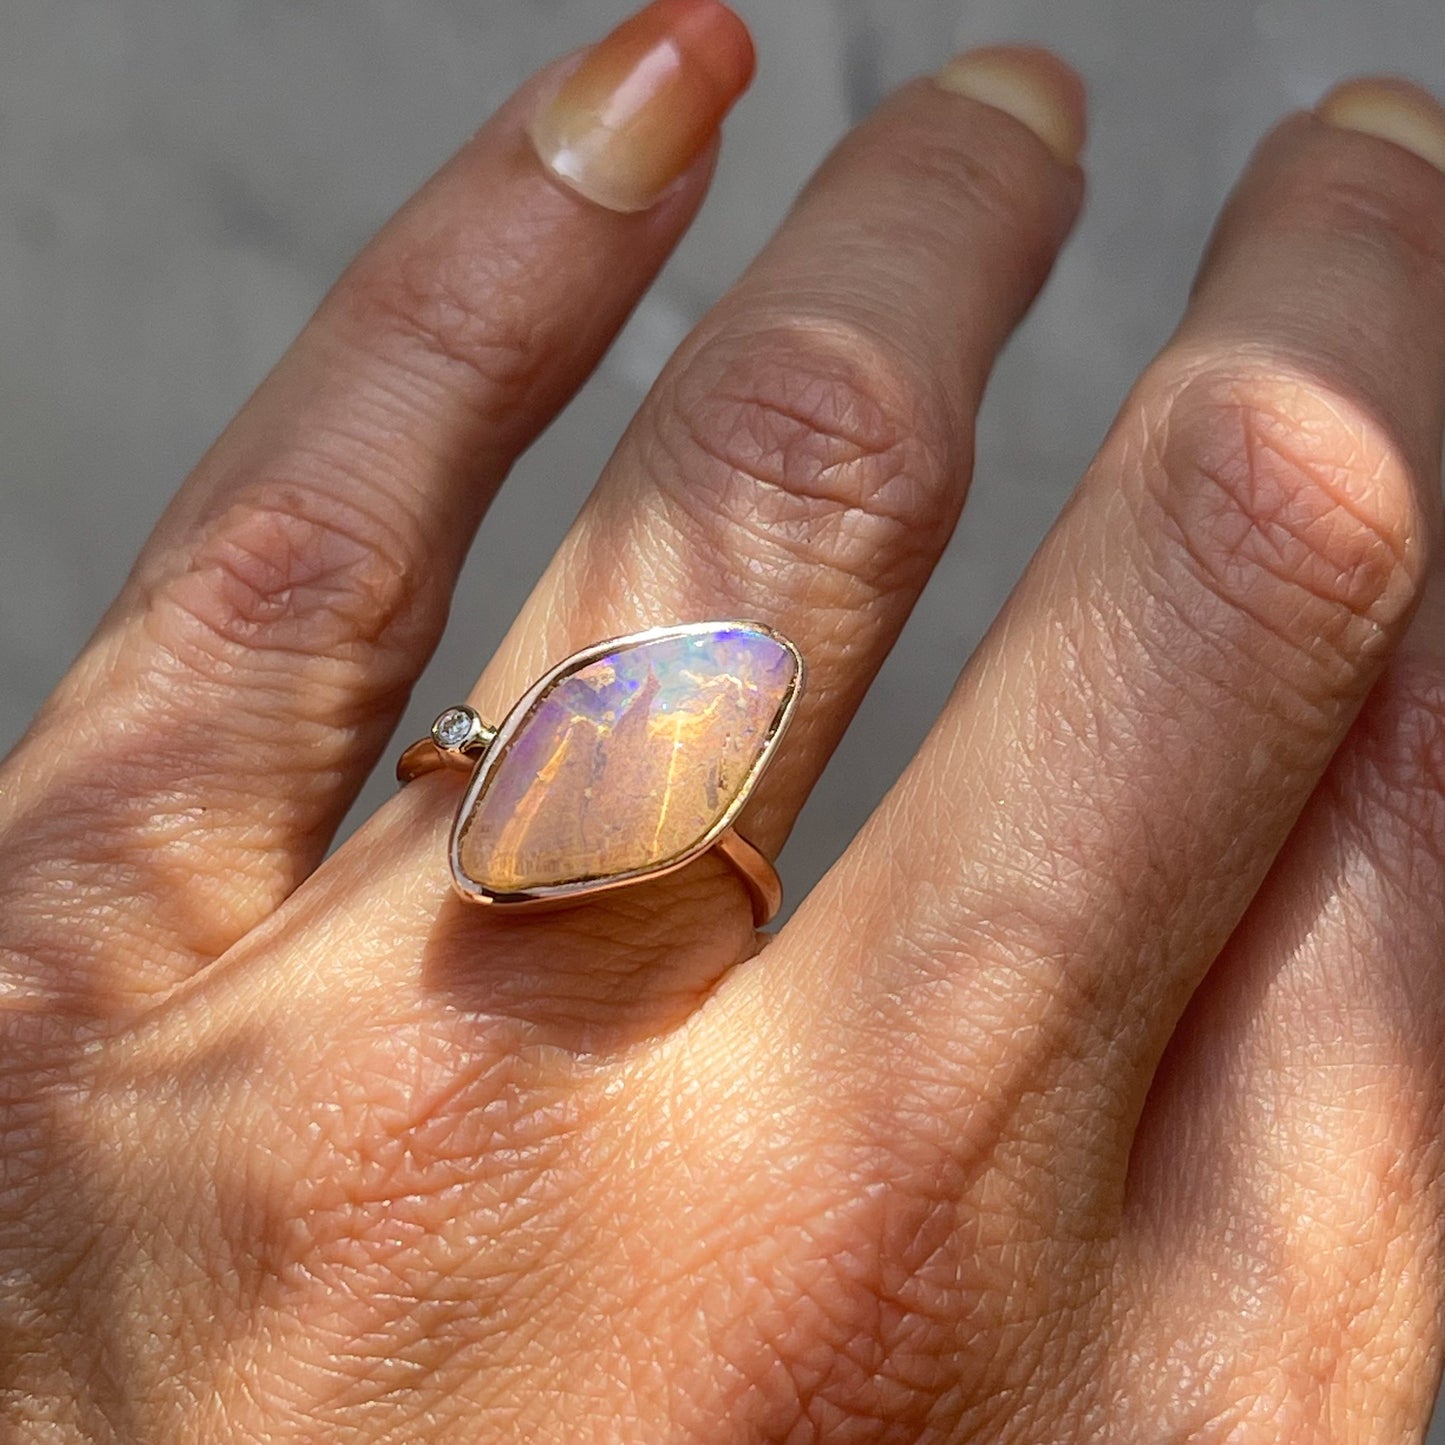 Zion Dali Australian Opal Ring by NIXIN Jewelry modeled on hand. Rose gold opal ring.